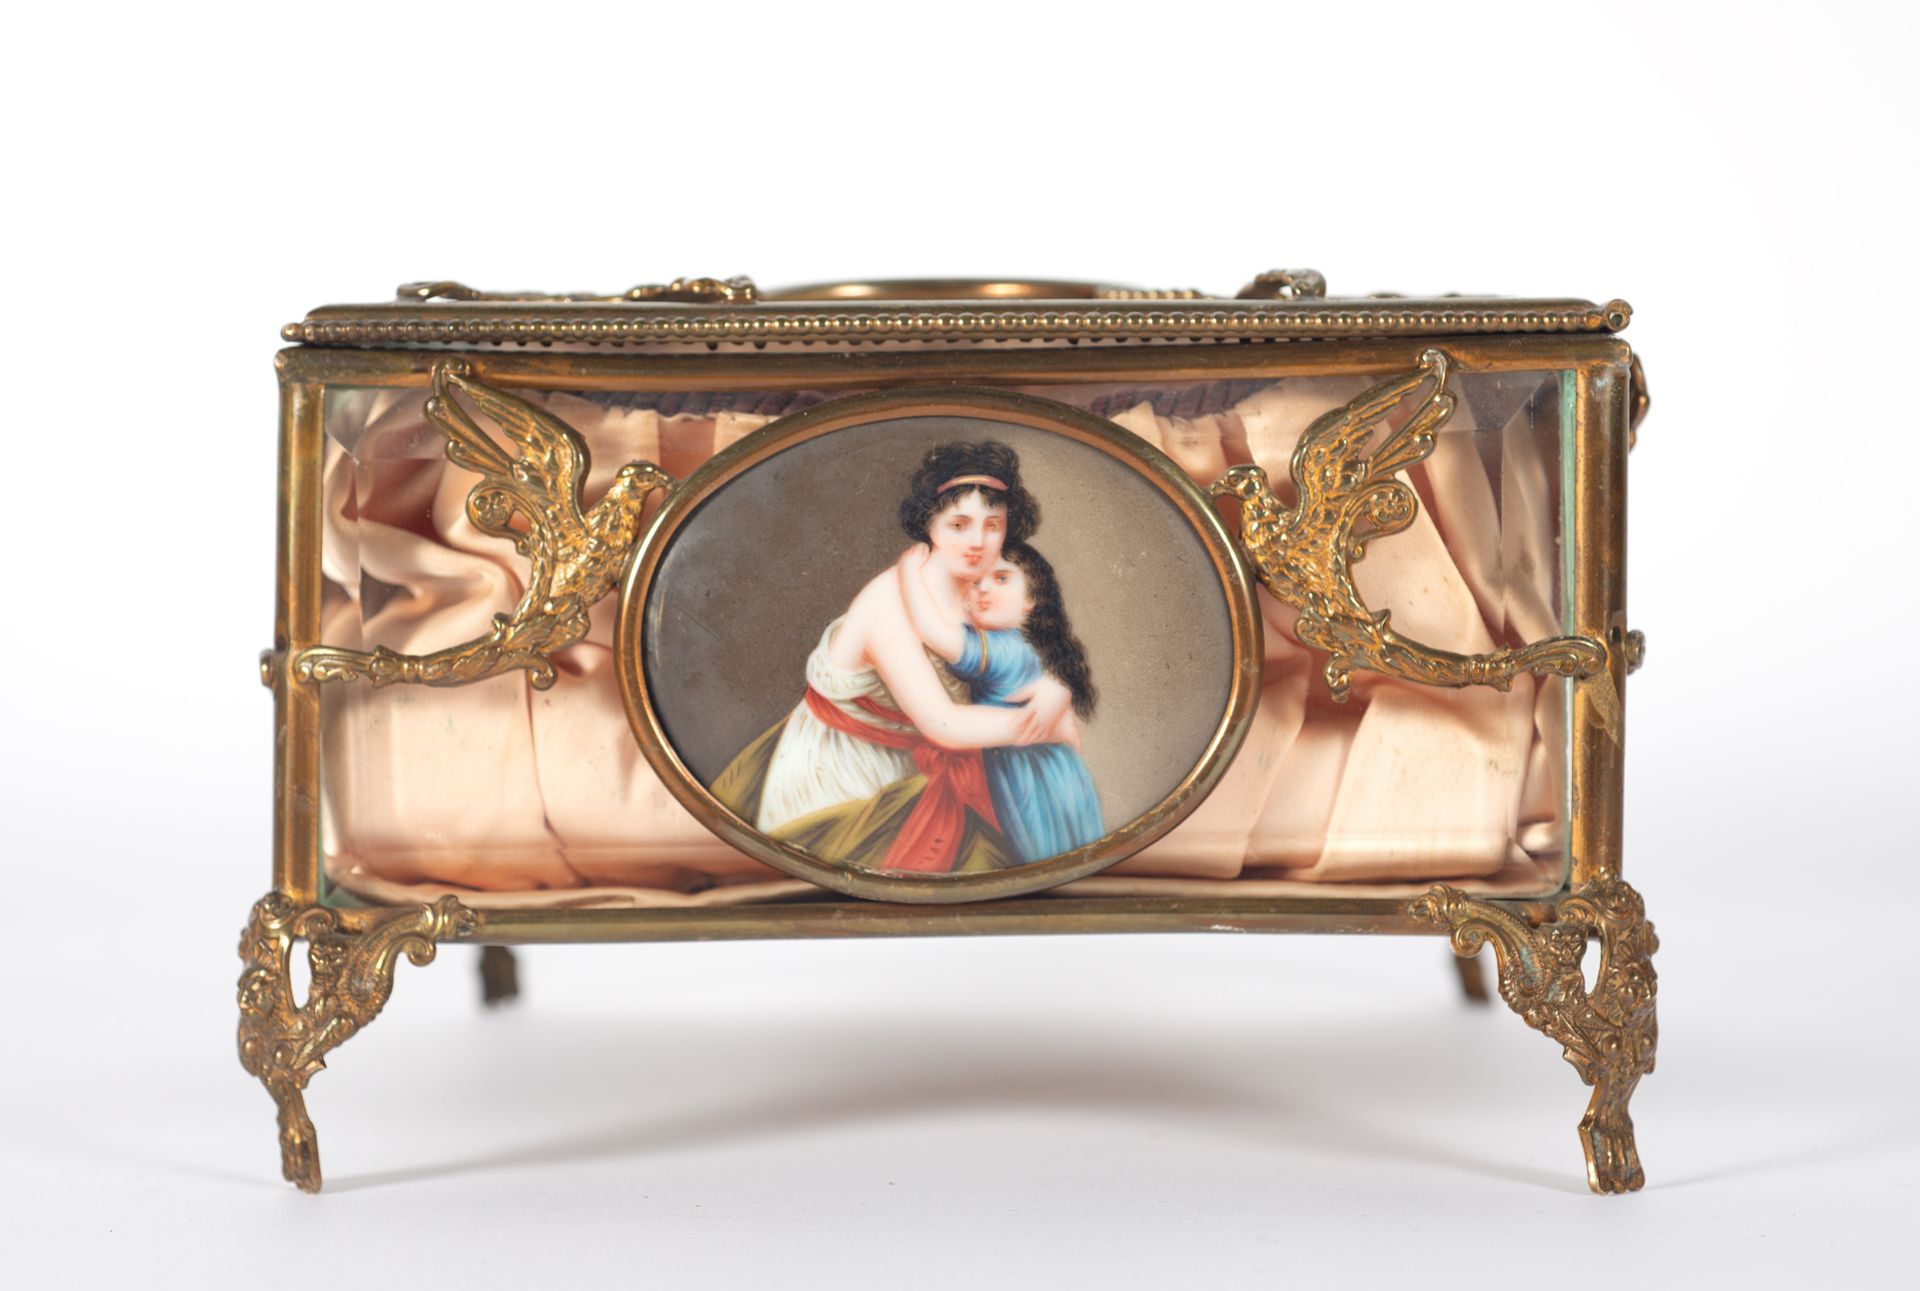 French bronze and enamel jewelry box, 19th century - Image 3 of 7